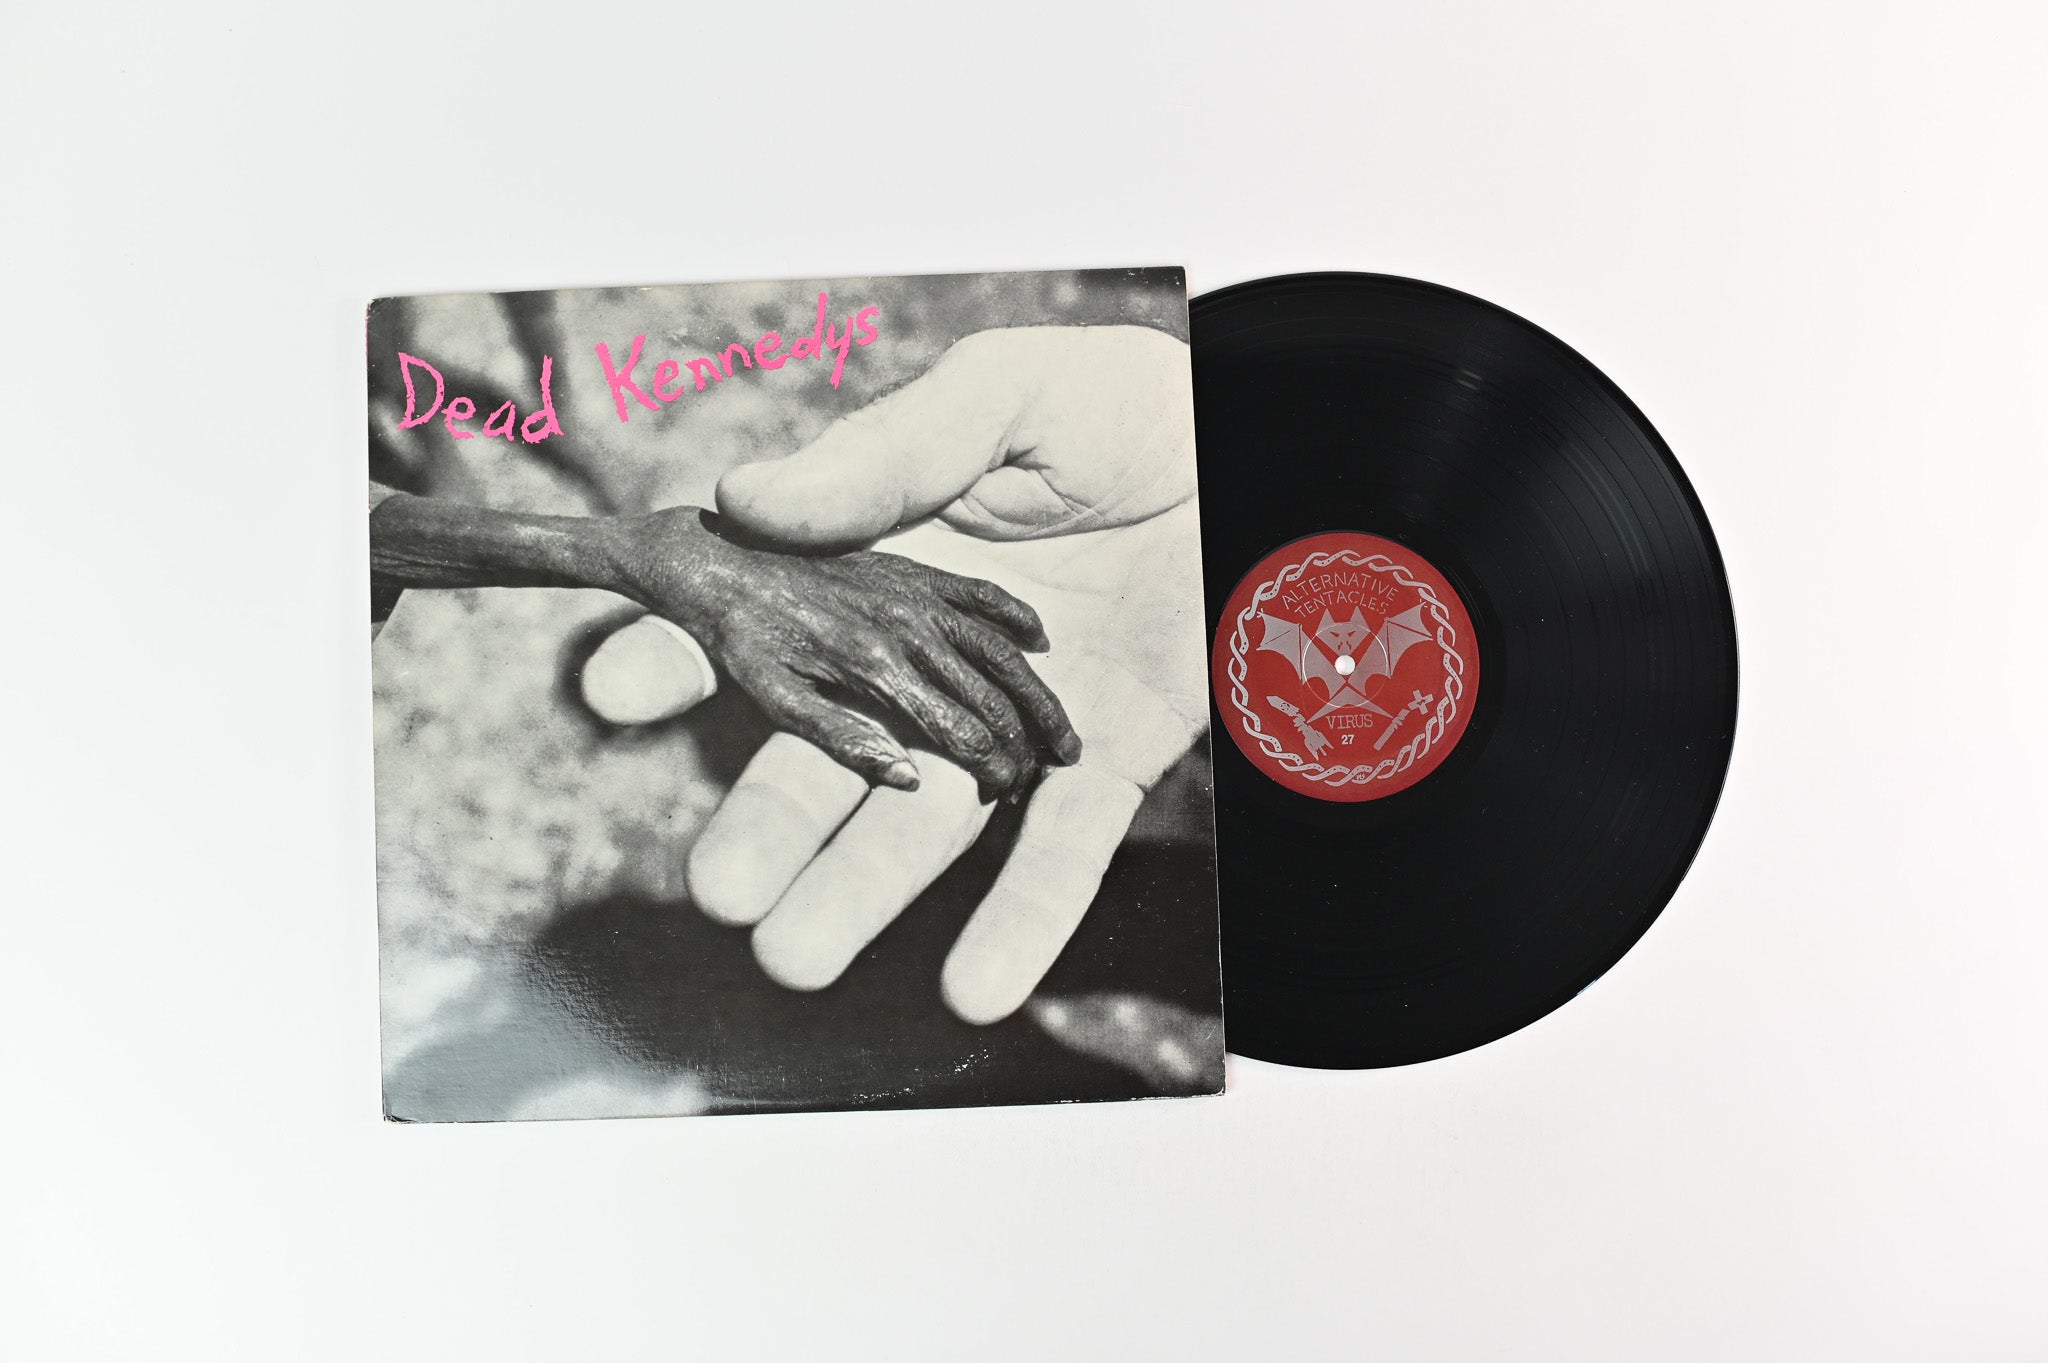 Dead Kennedys - Plastic Surgery Disasters on Alternative Tentacles Reissue With Booklet